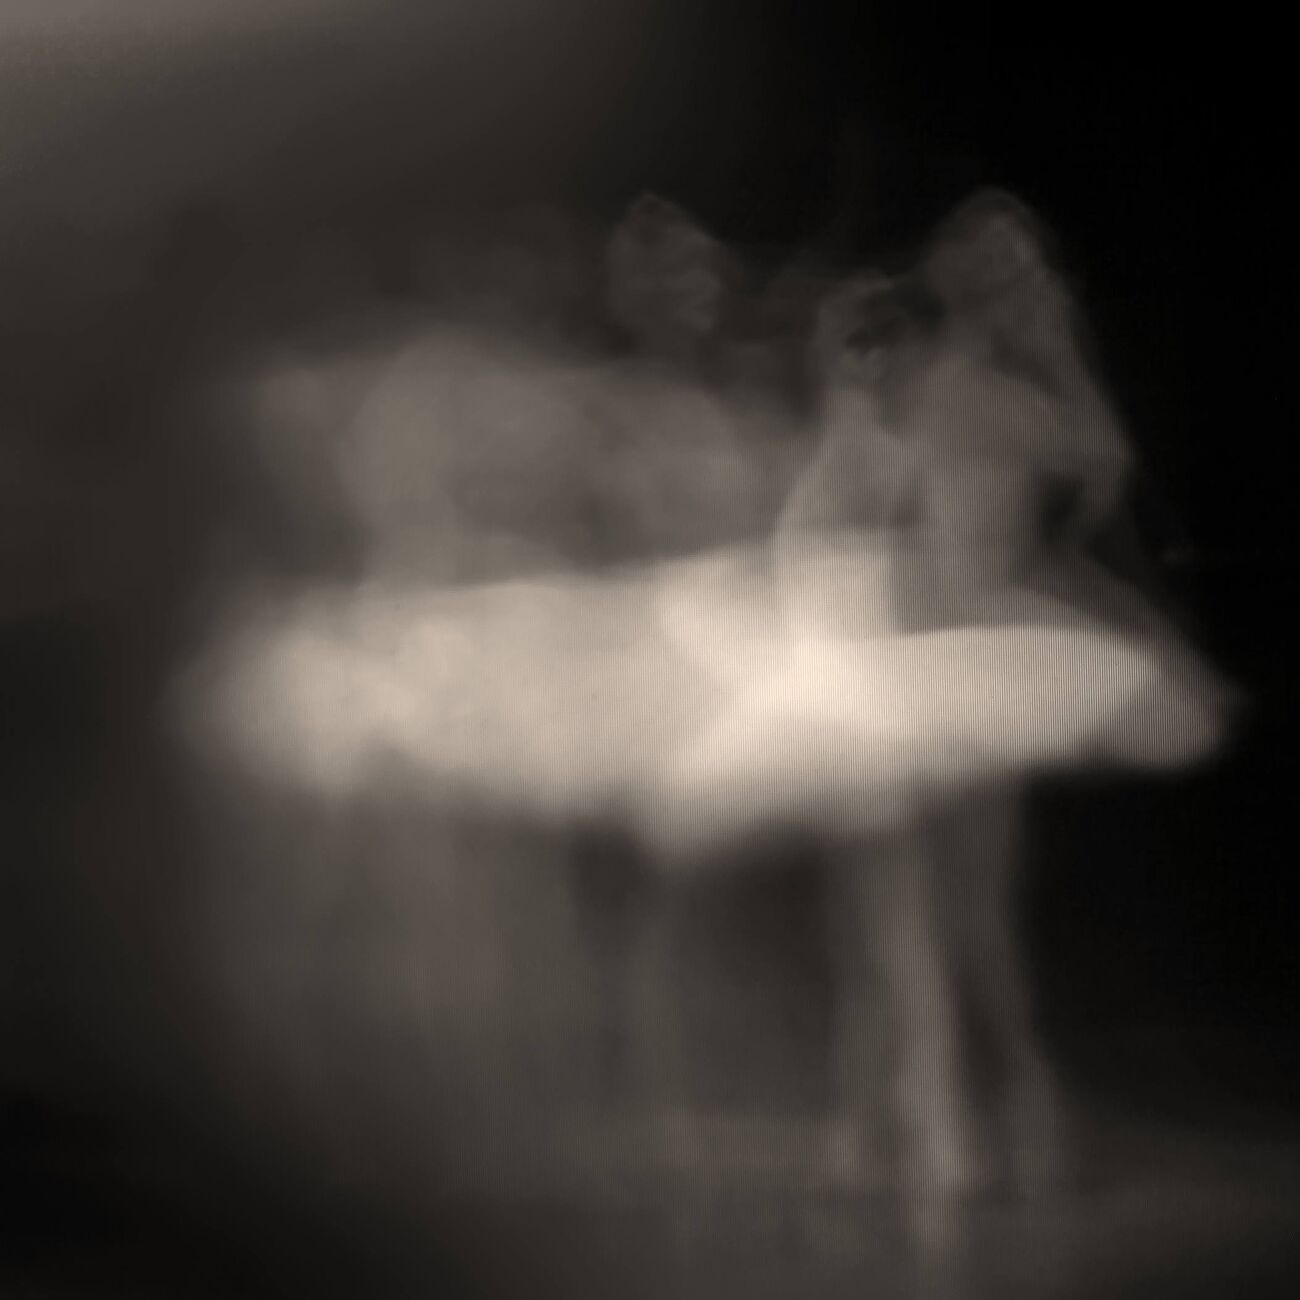 Ghots Opera, Study 33, The Swan Lake, Berlin, Germany. April 1998. Ref-11469 - Denis Olivier Photography